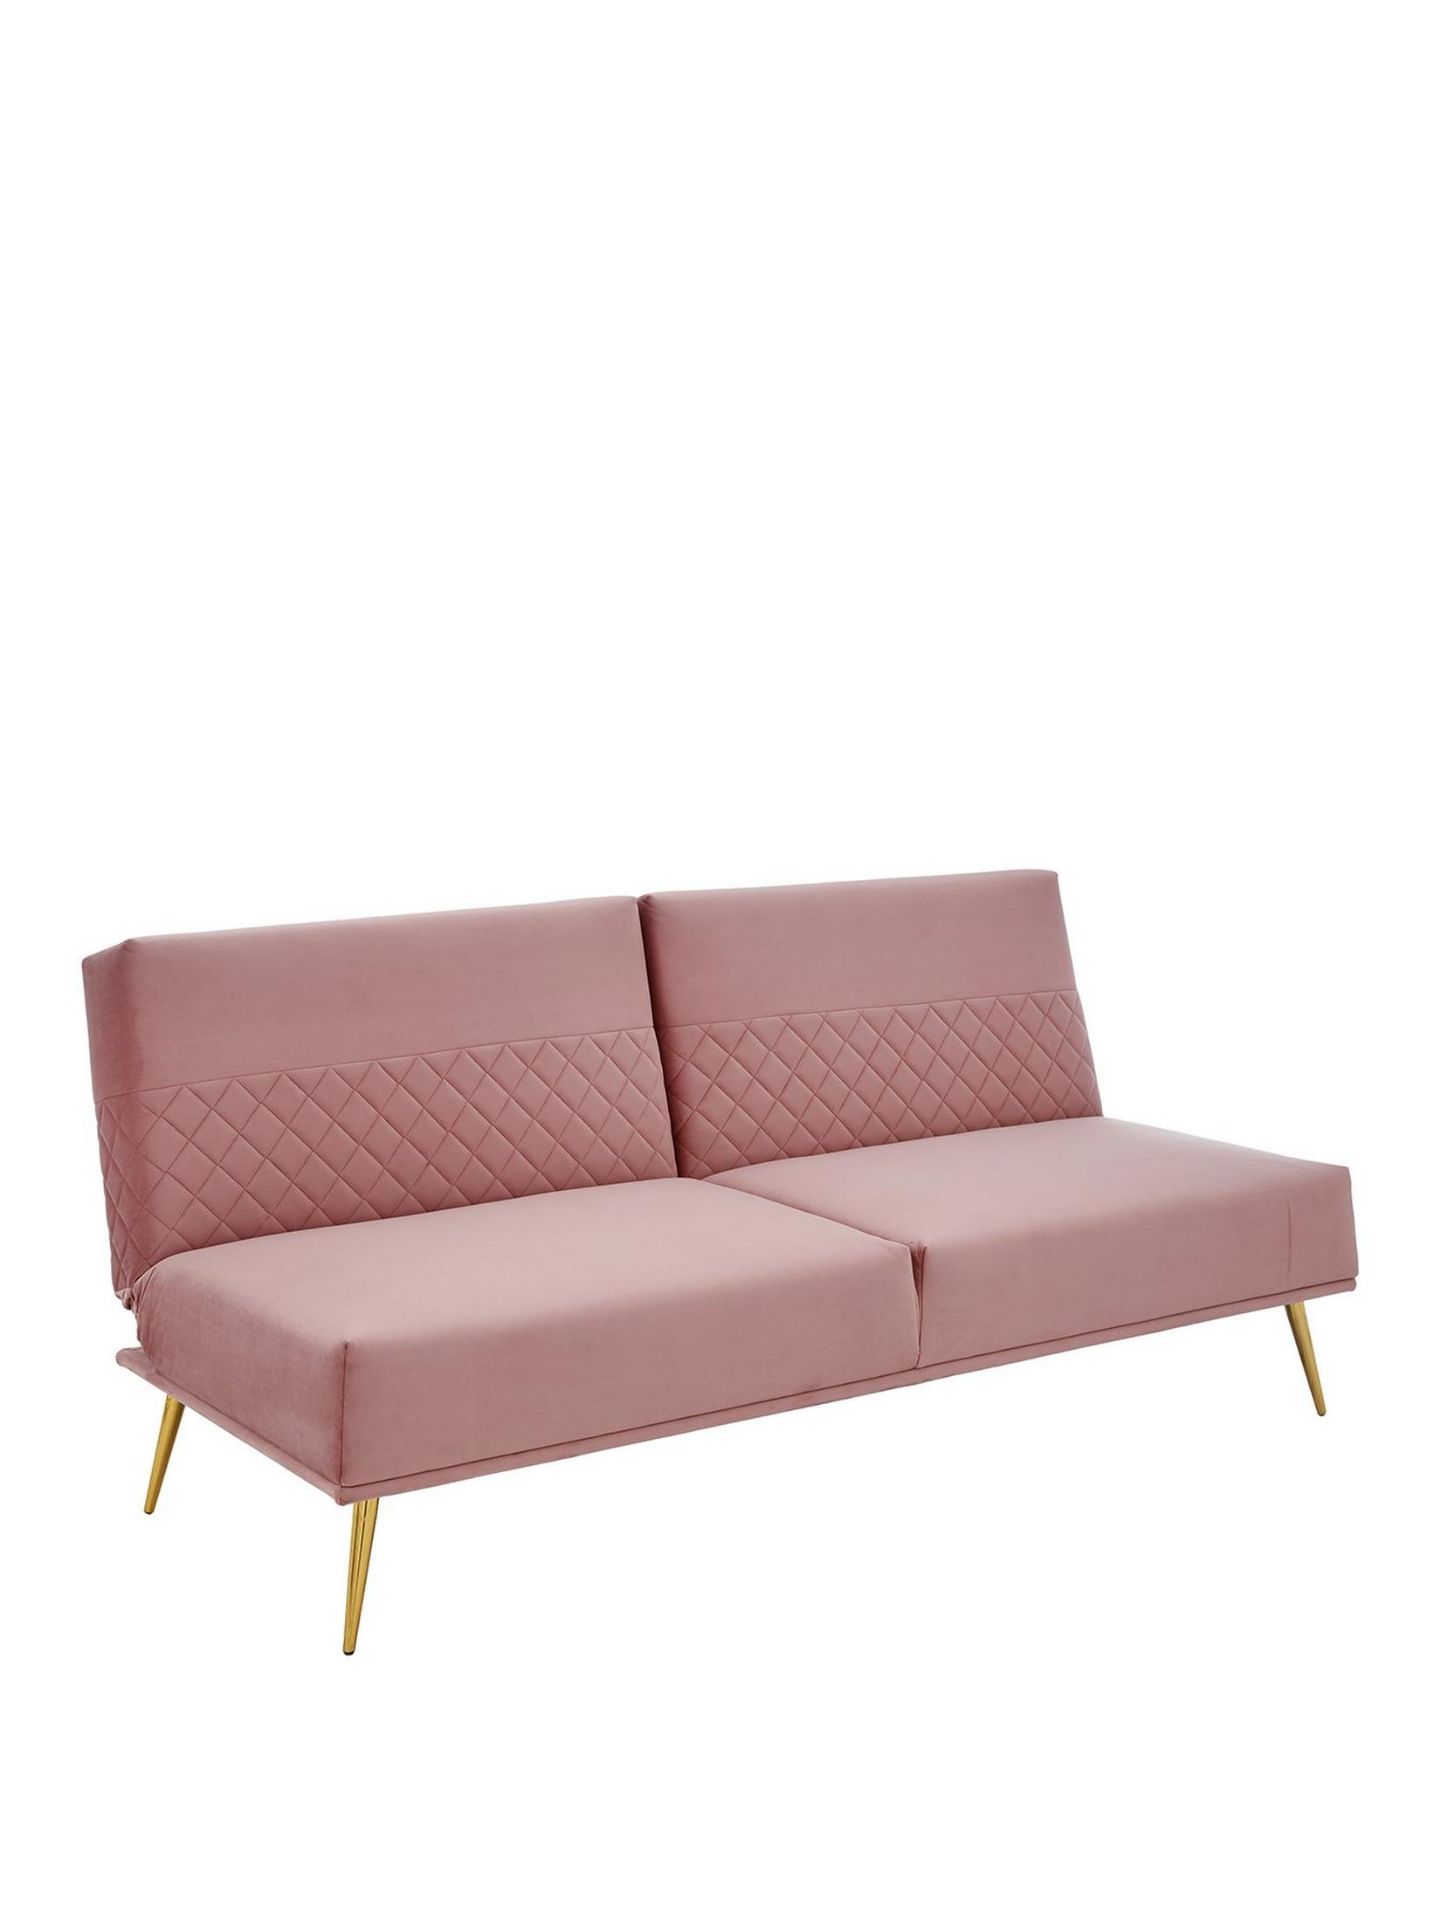 Florence Sofabed. RPP £349.00. Dimensions: As sofa - Height 82, Width 182, Depth 84 cm As bed - - Image 3 of 3